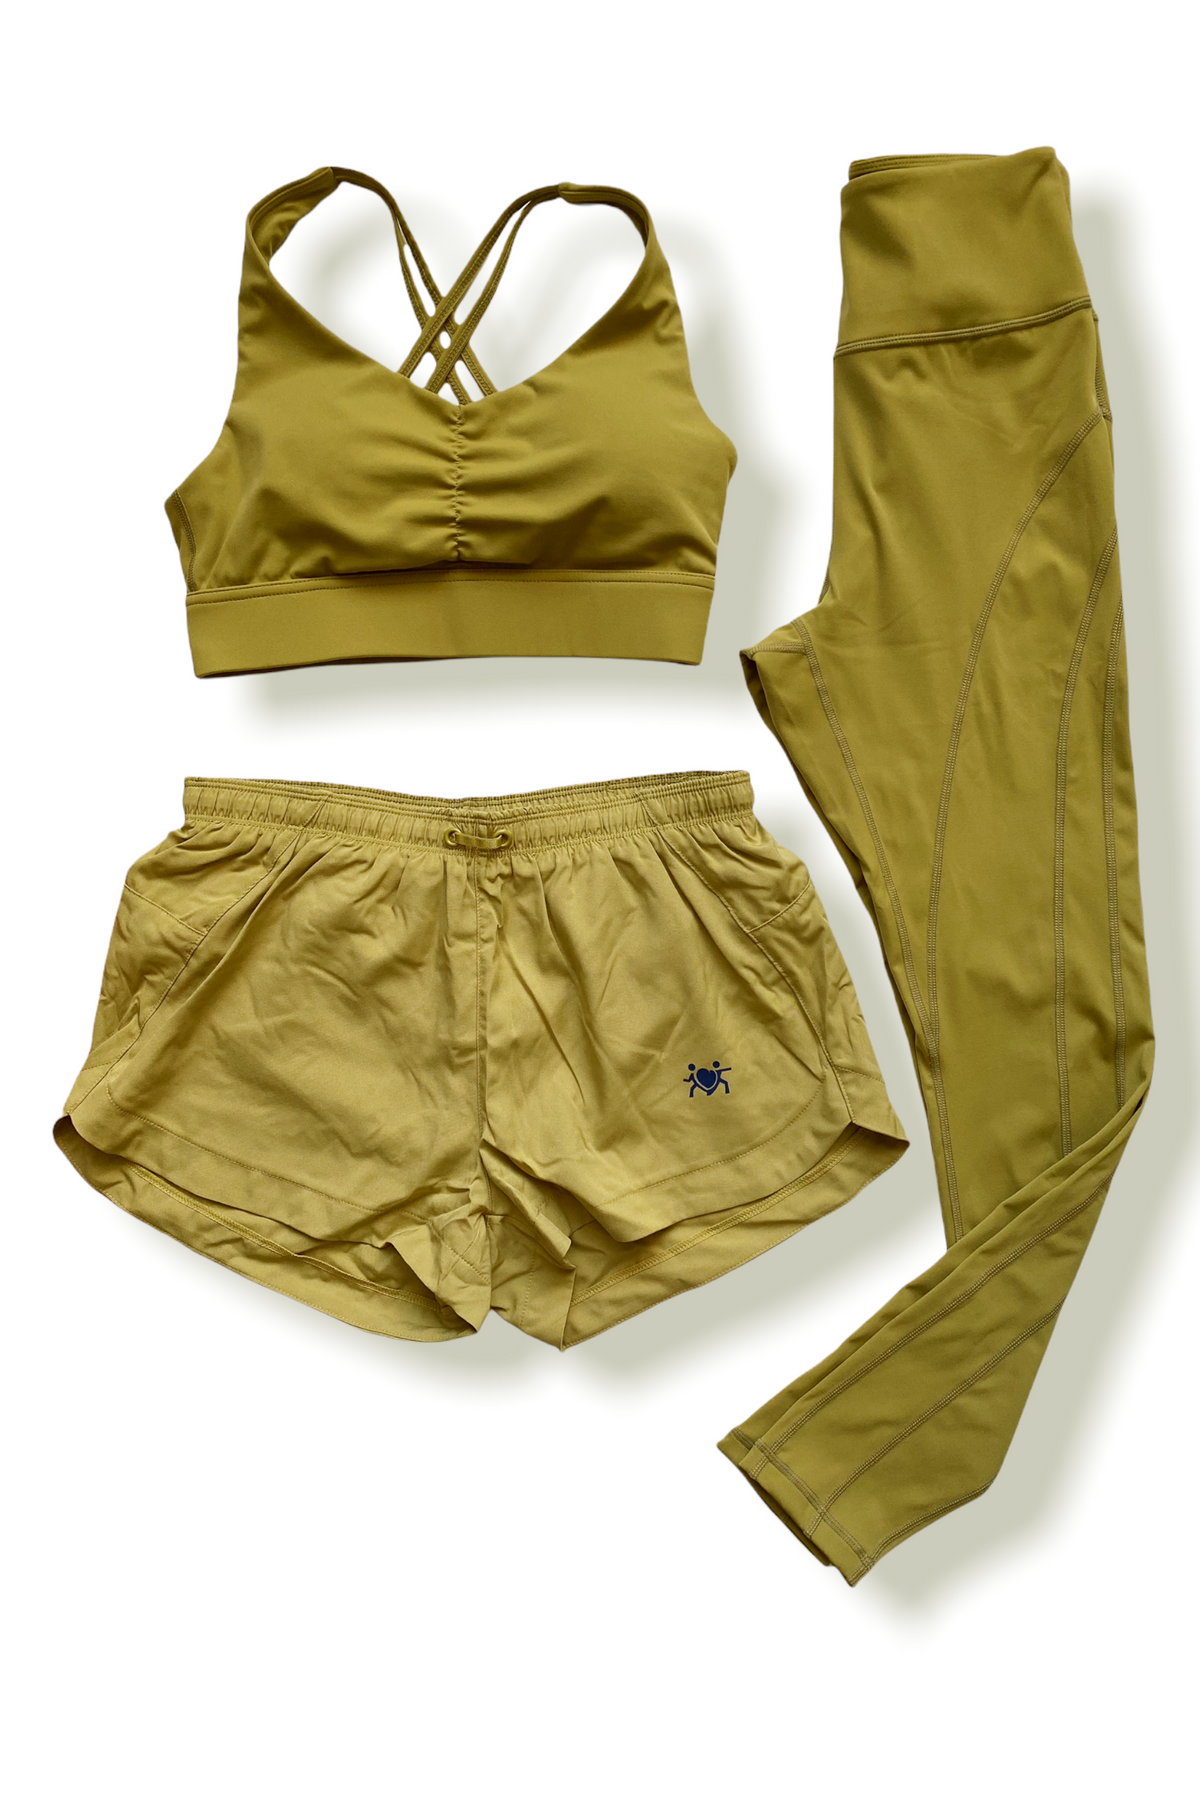 Complete Matcha Kit (with Schenley Run Shorts)